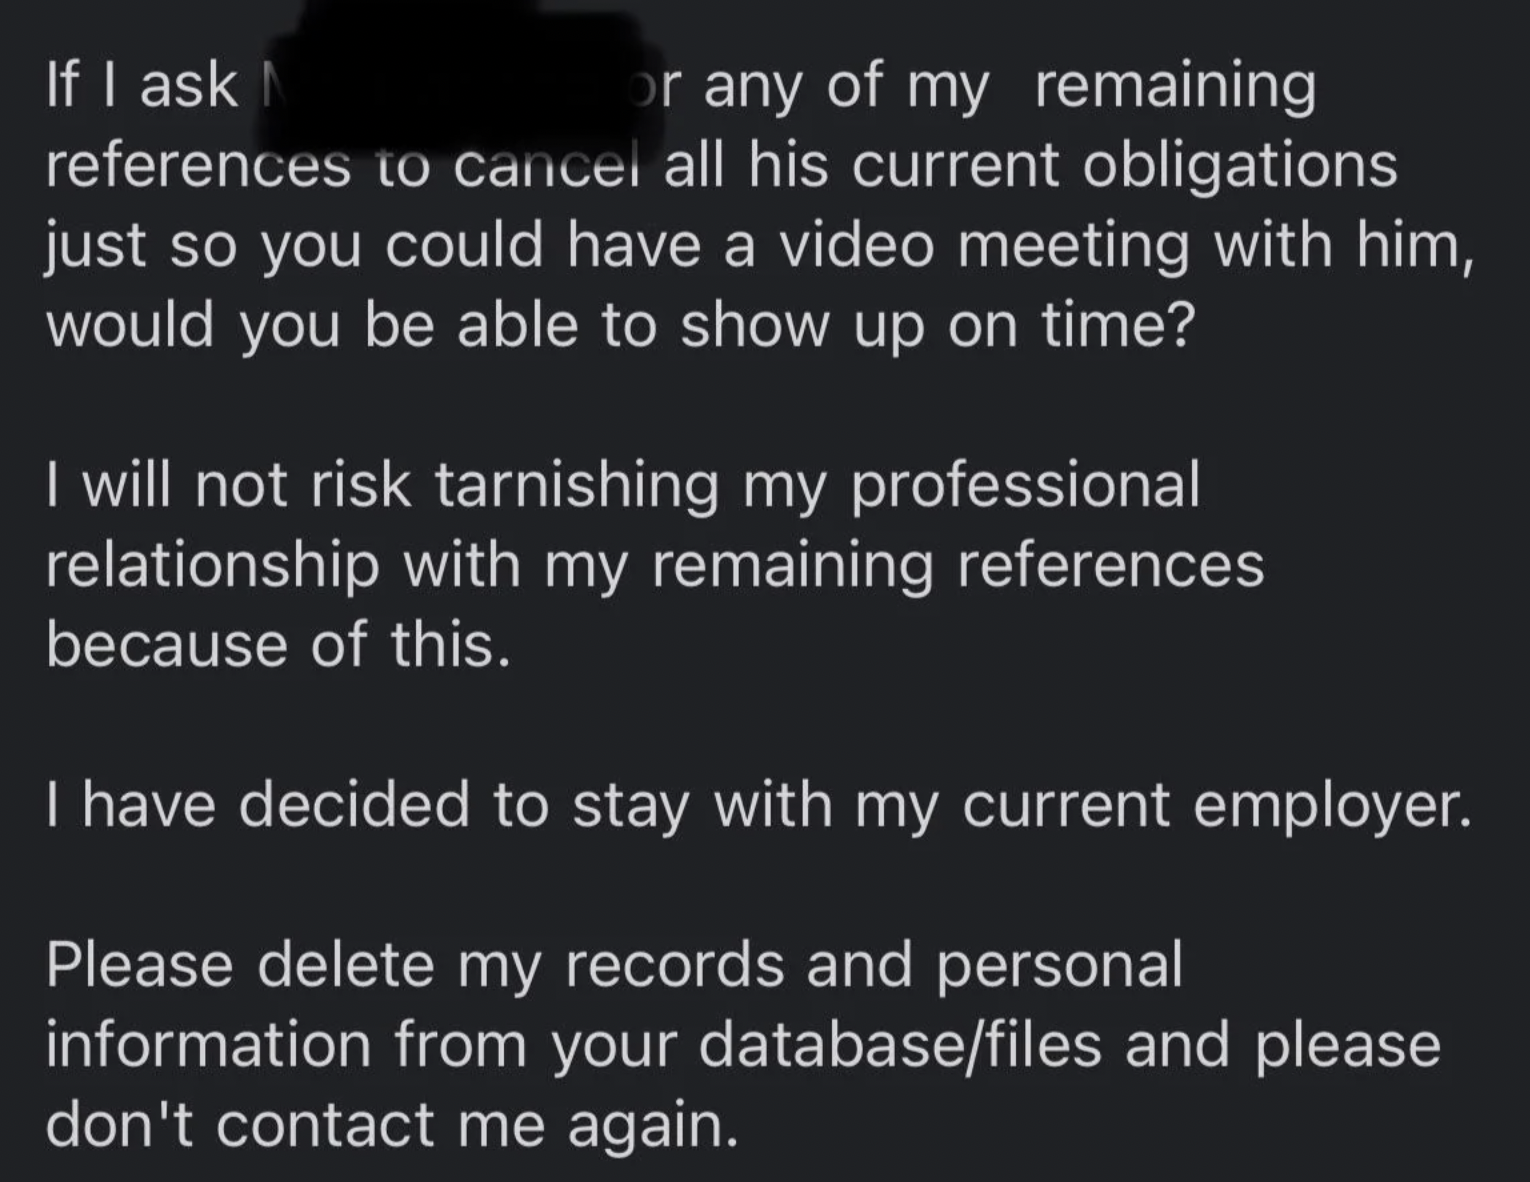 Incompetent Hiring Manager Wastes References' Time – Gets Hostile When Called Out